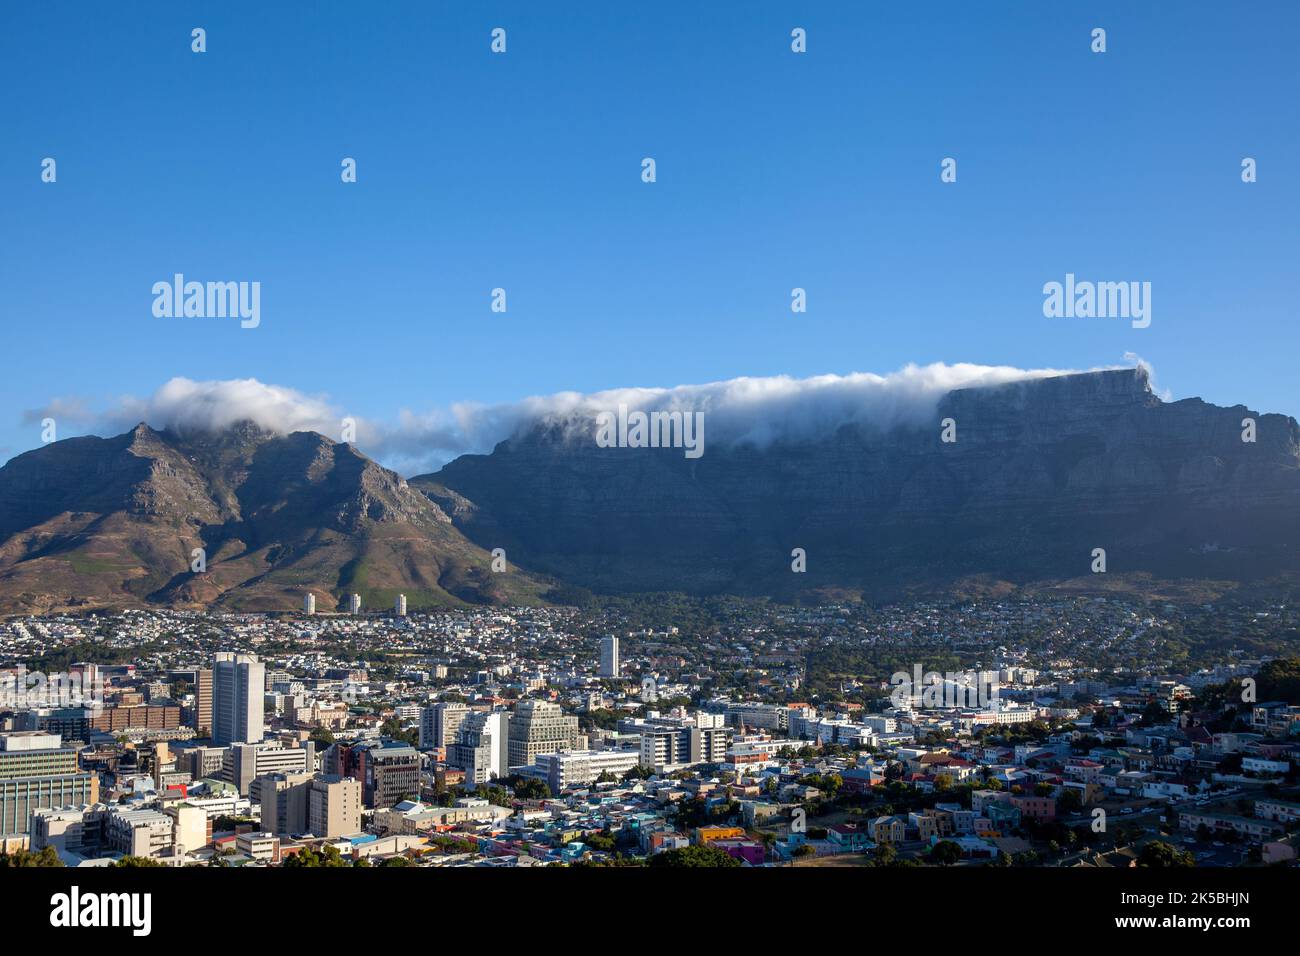 Views over Cape Town City and Residential Areas belowDevils Peak and Table Mountain, Cape Town - South Africa Stock Photo